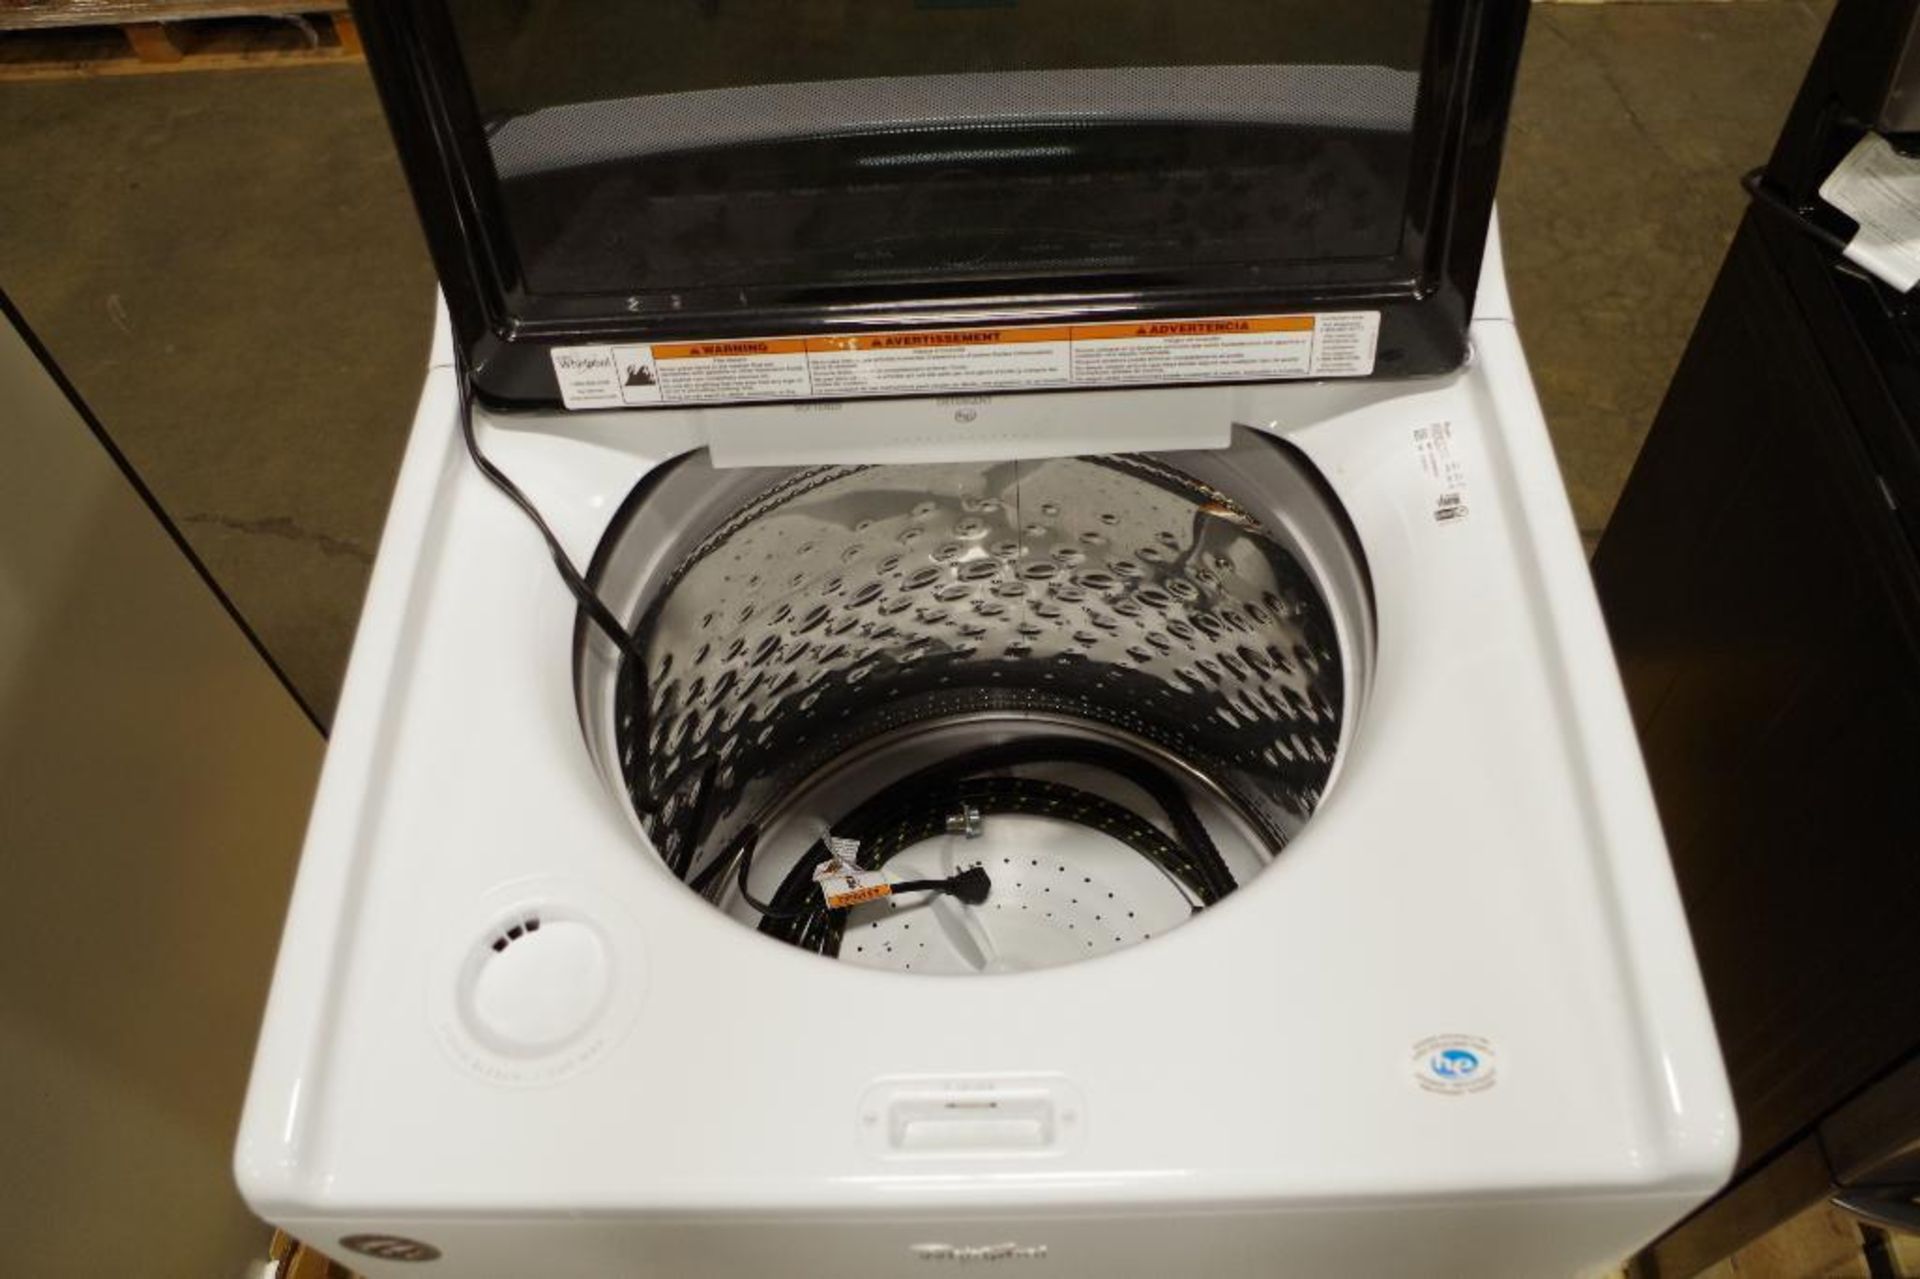 WHIRLPOOL Top Load Washer M/N WTW8000DW3 (Must inspect to assess condition) - Image 5 of 9